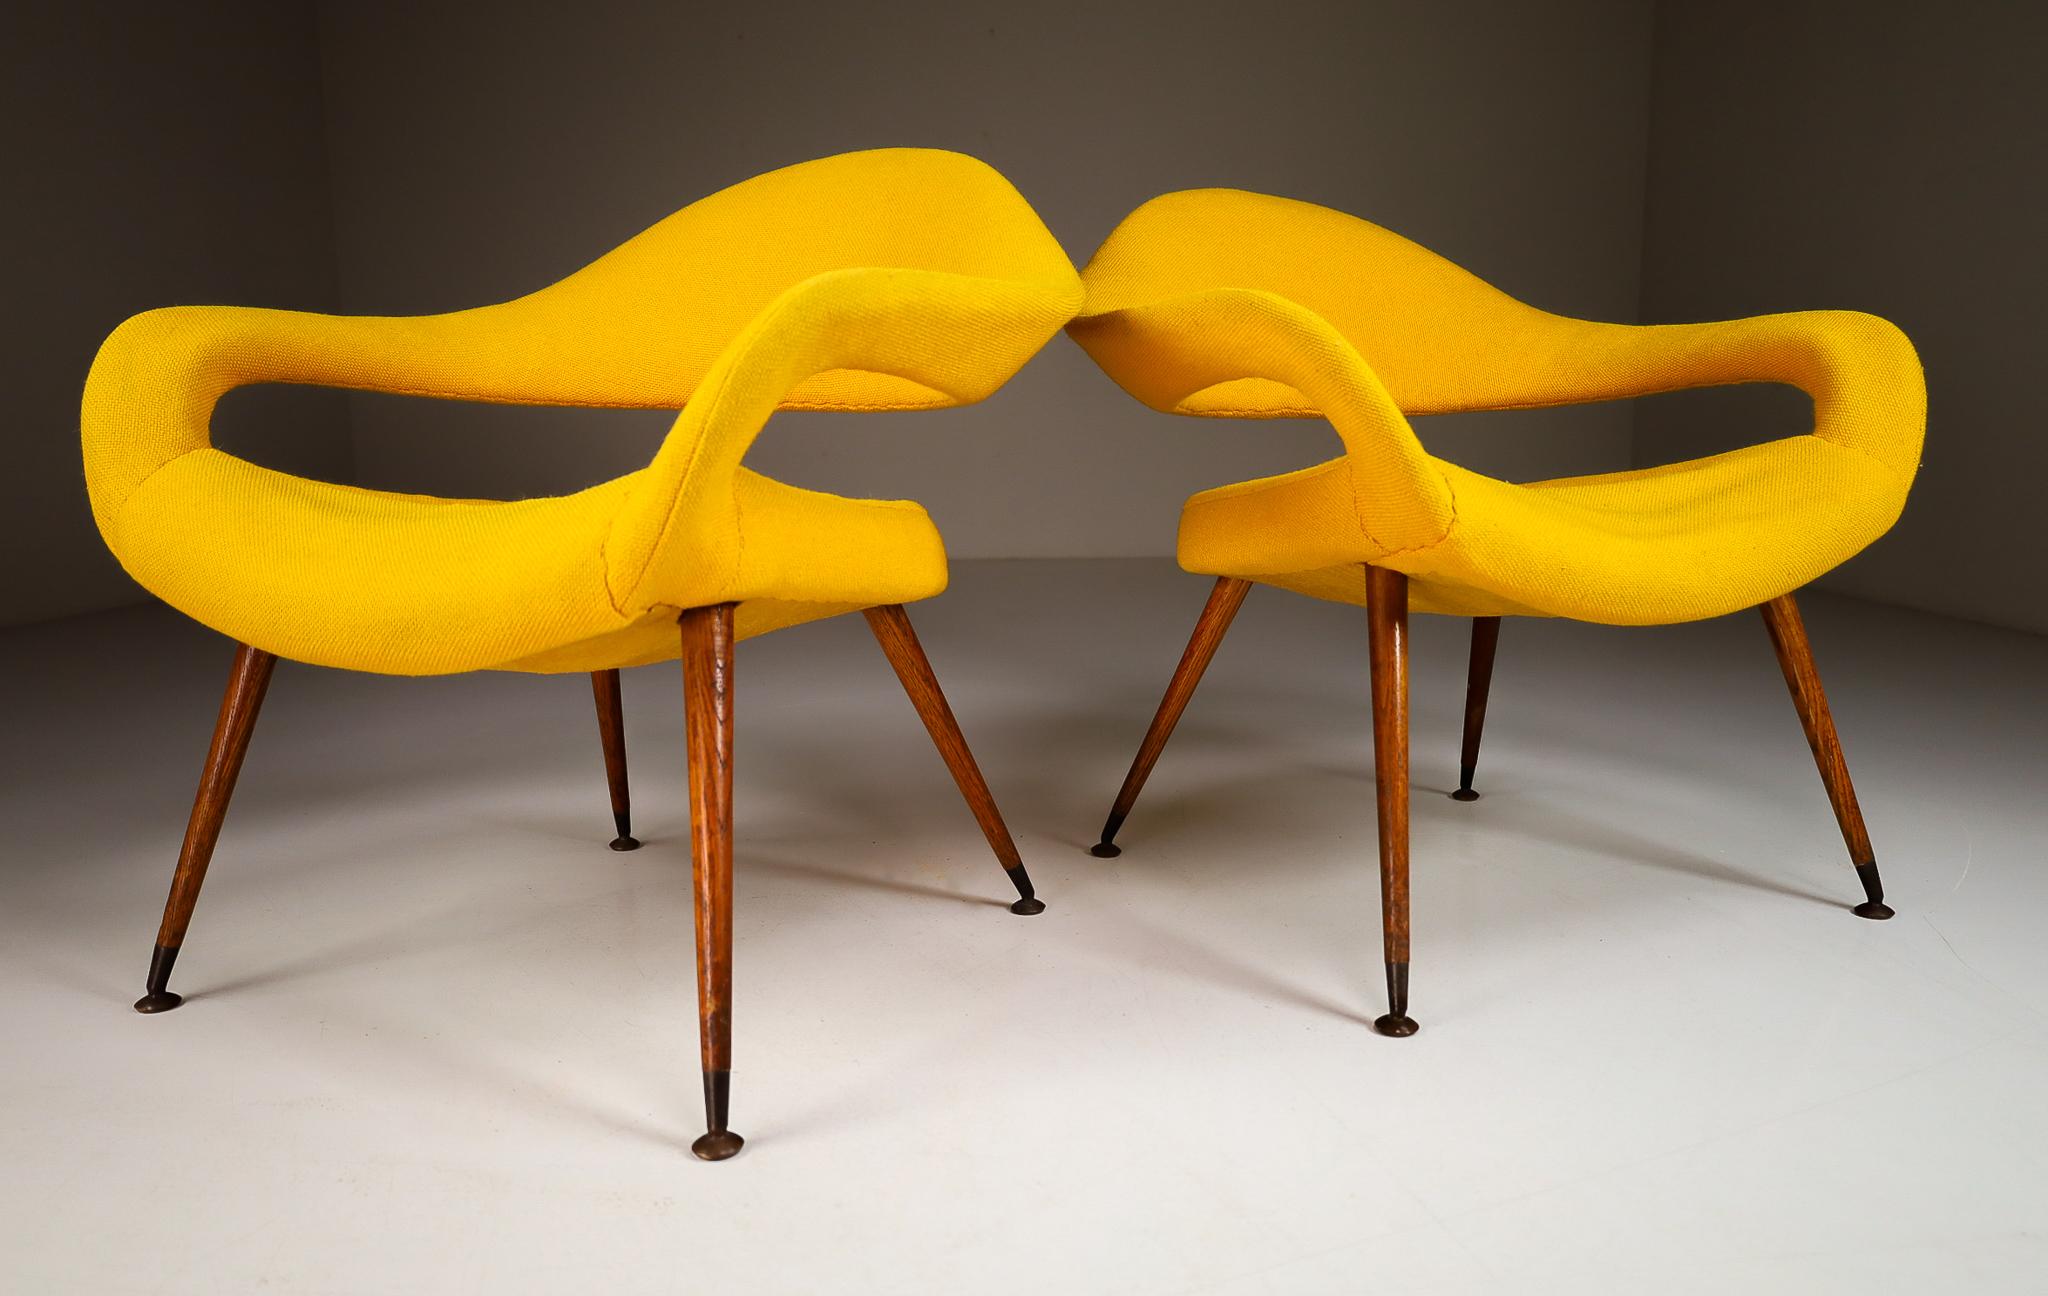 Very beautiful and iconic pair of original lounge chairs designed by Gastone Rinaldi in 1954, Italy.

The shape of the armchairs is sculptural, unique, and extraordinary: the two delicate armrests merge to form a backrest with very filigree